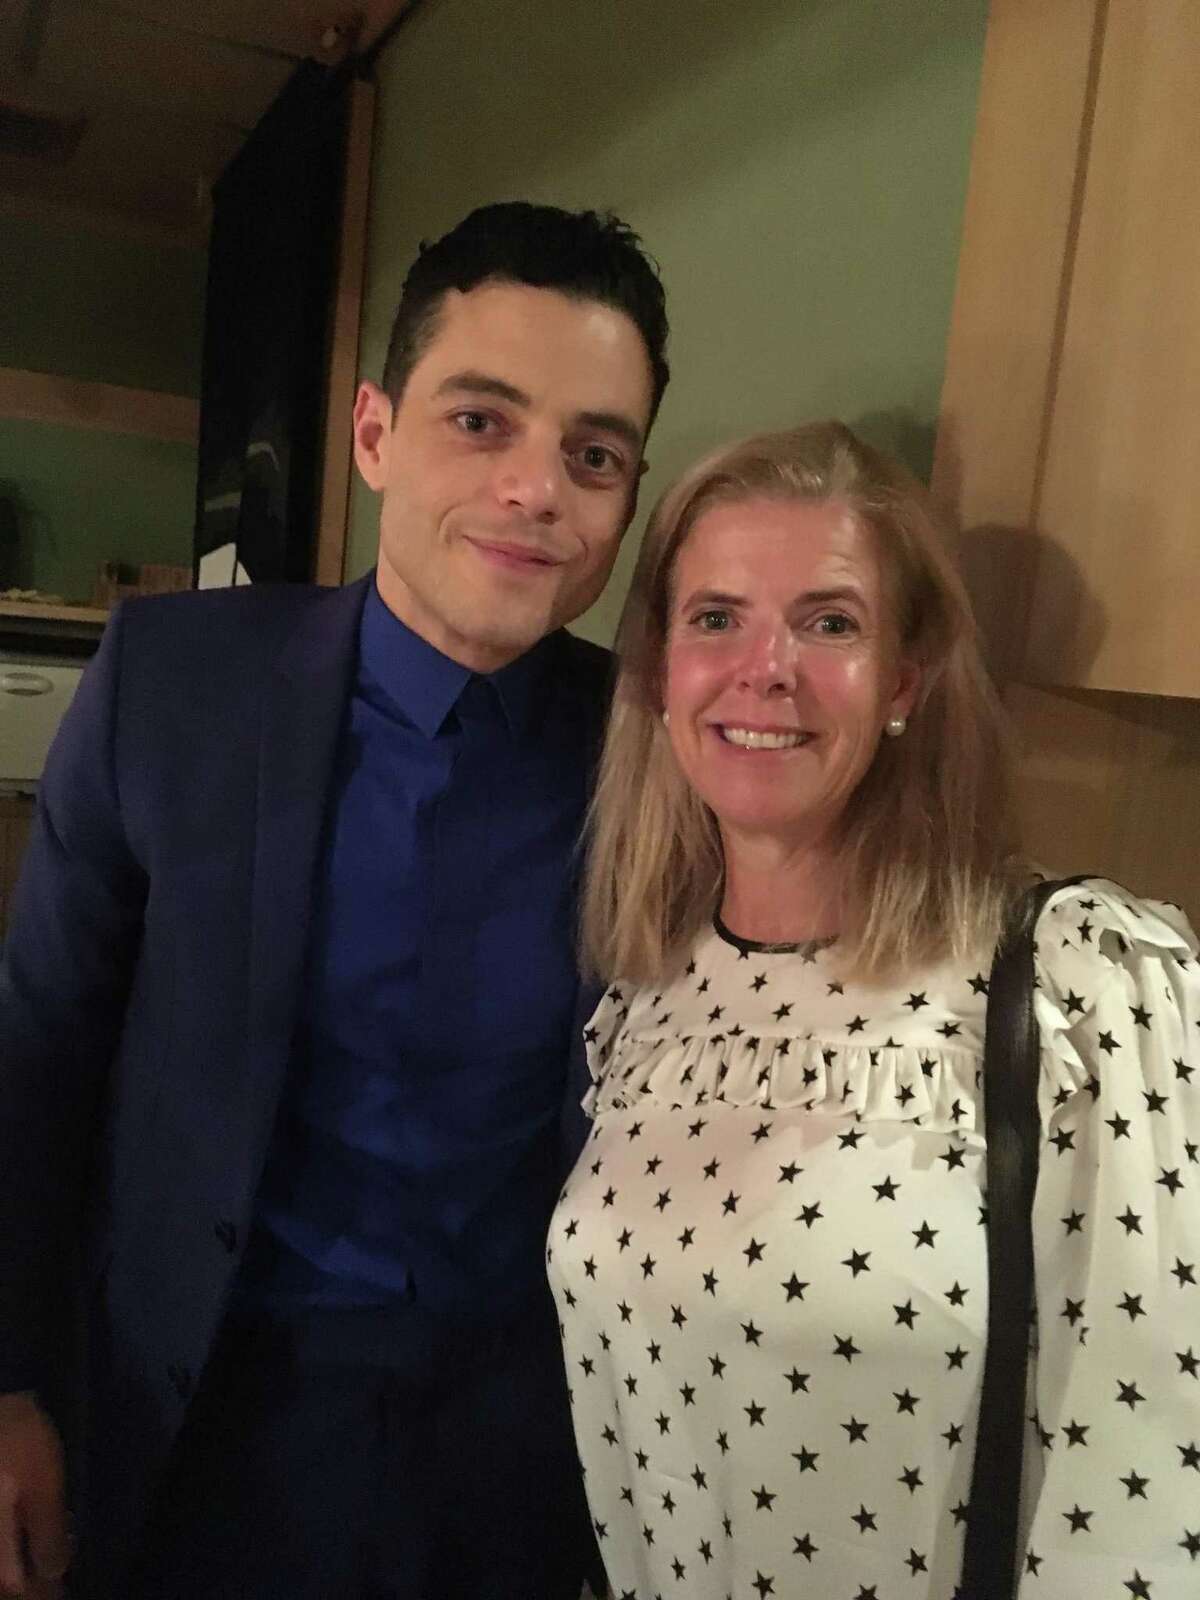 Riverside resident Kathleen Bellissimo with actor Rami Malek, who plays Queen lead singer Freddie Mercury in “Bohemian Rhapsody,” at the film's Japanese premiere at the Roppongi Hills Theater in Tokyo.